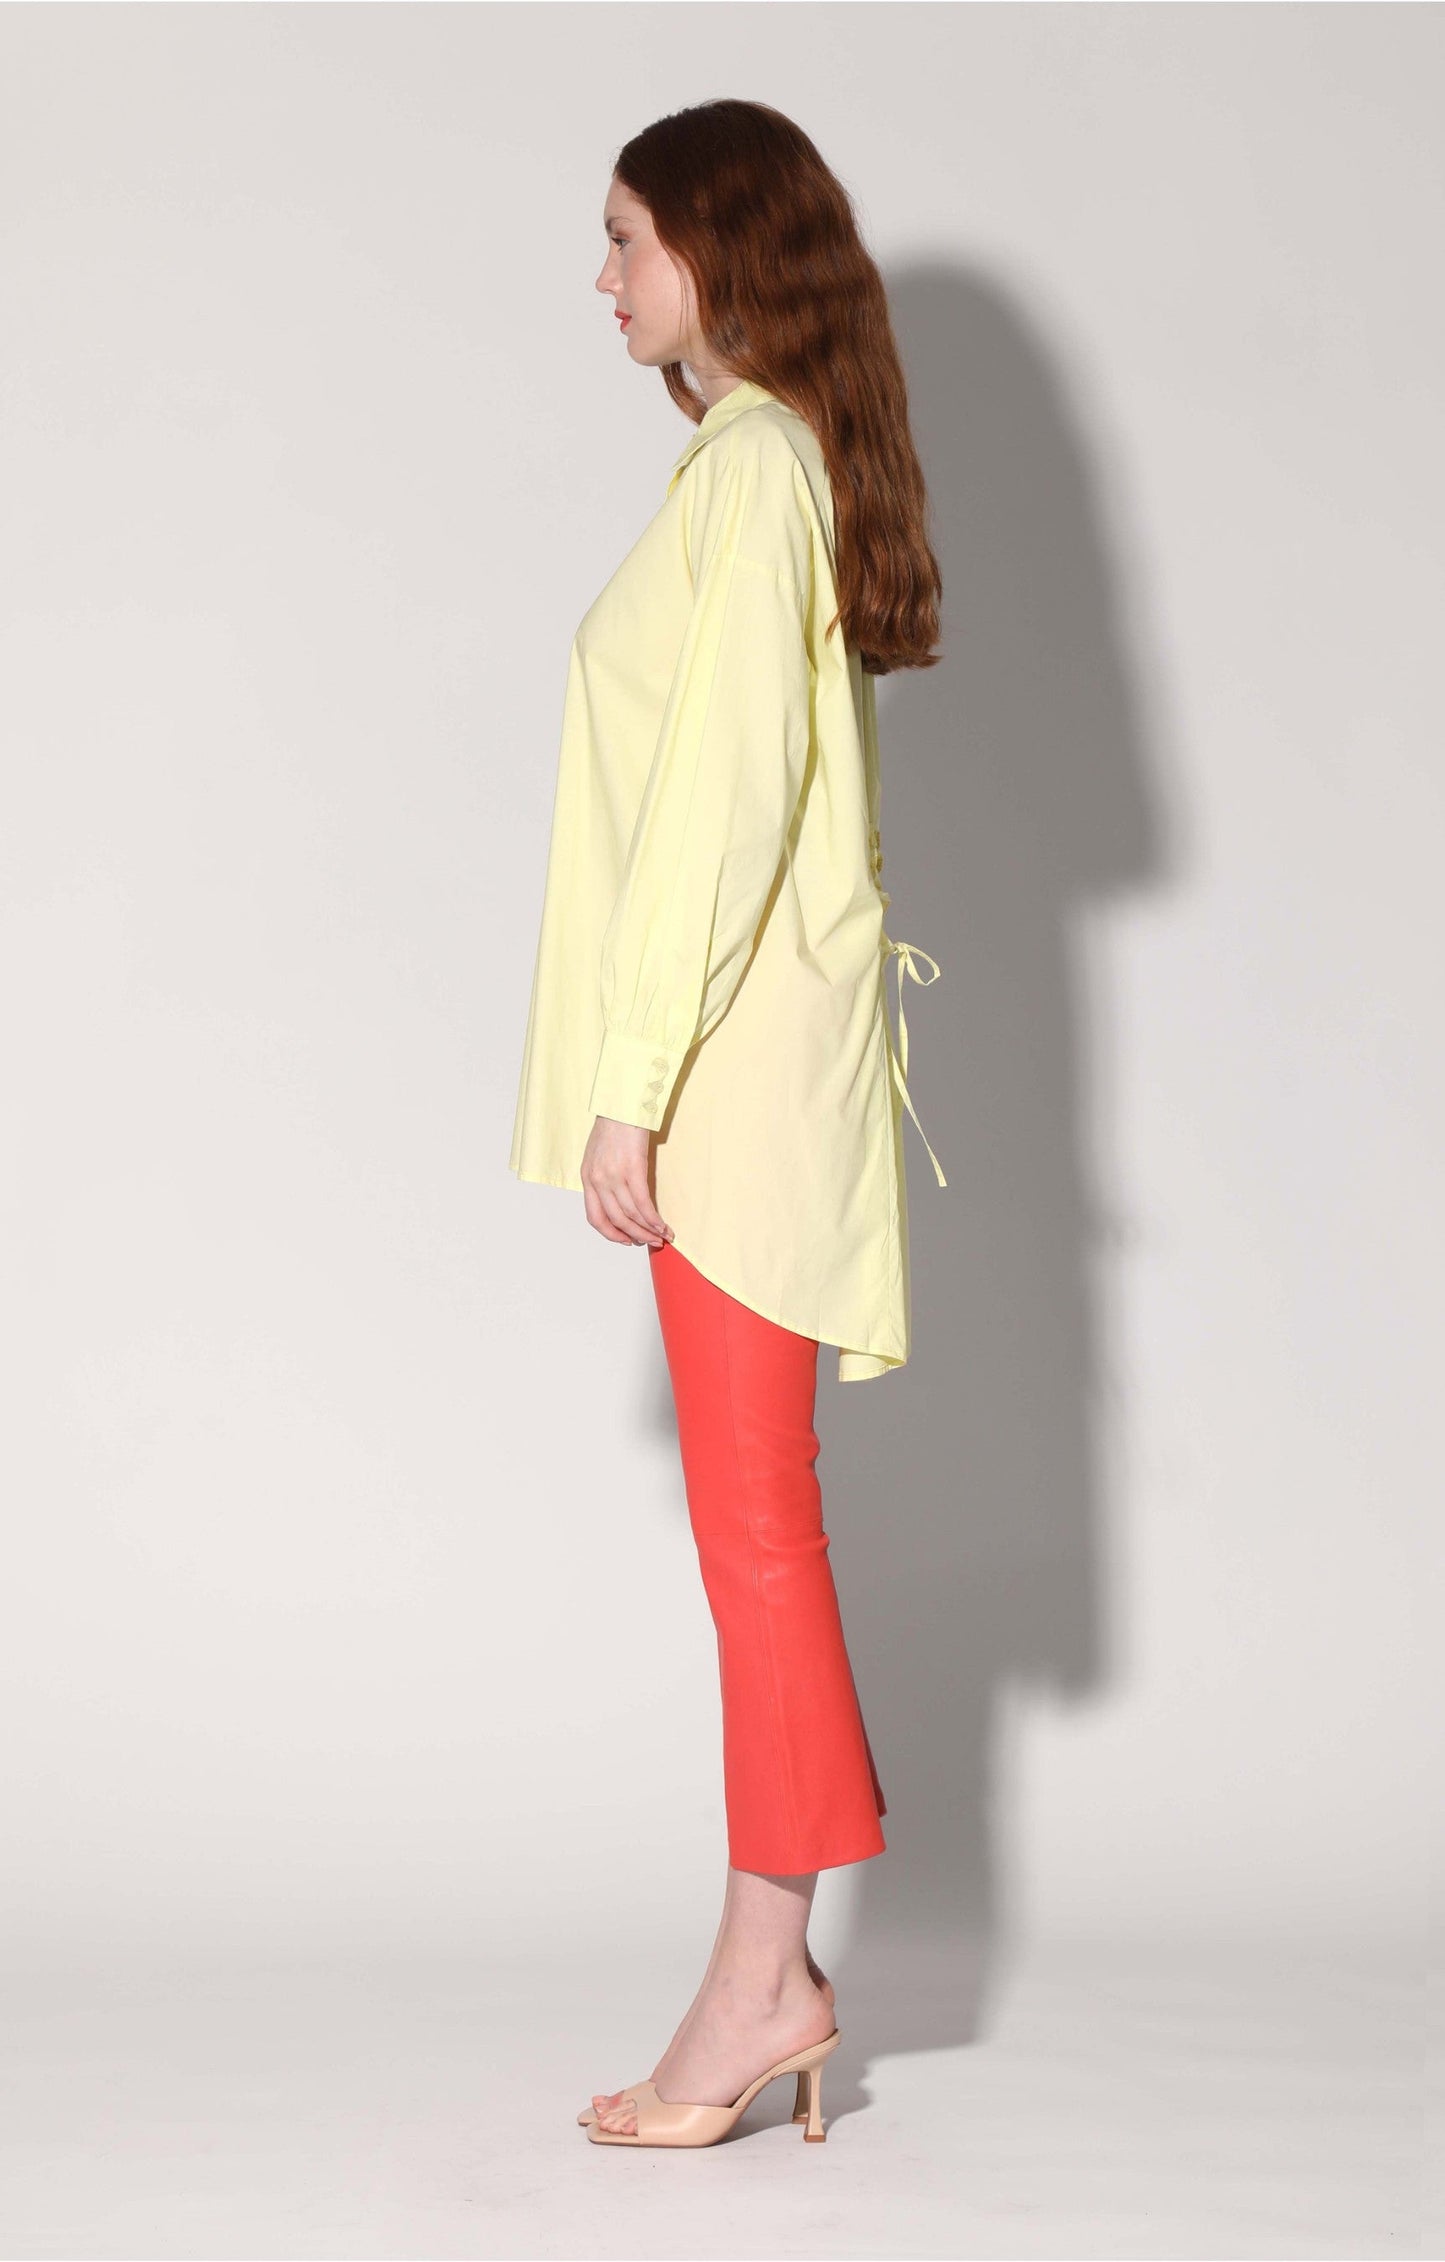 Vincenza Top, Limoncello by Walter Baker